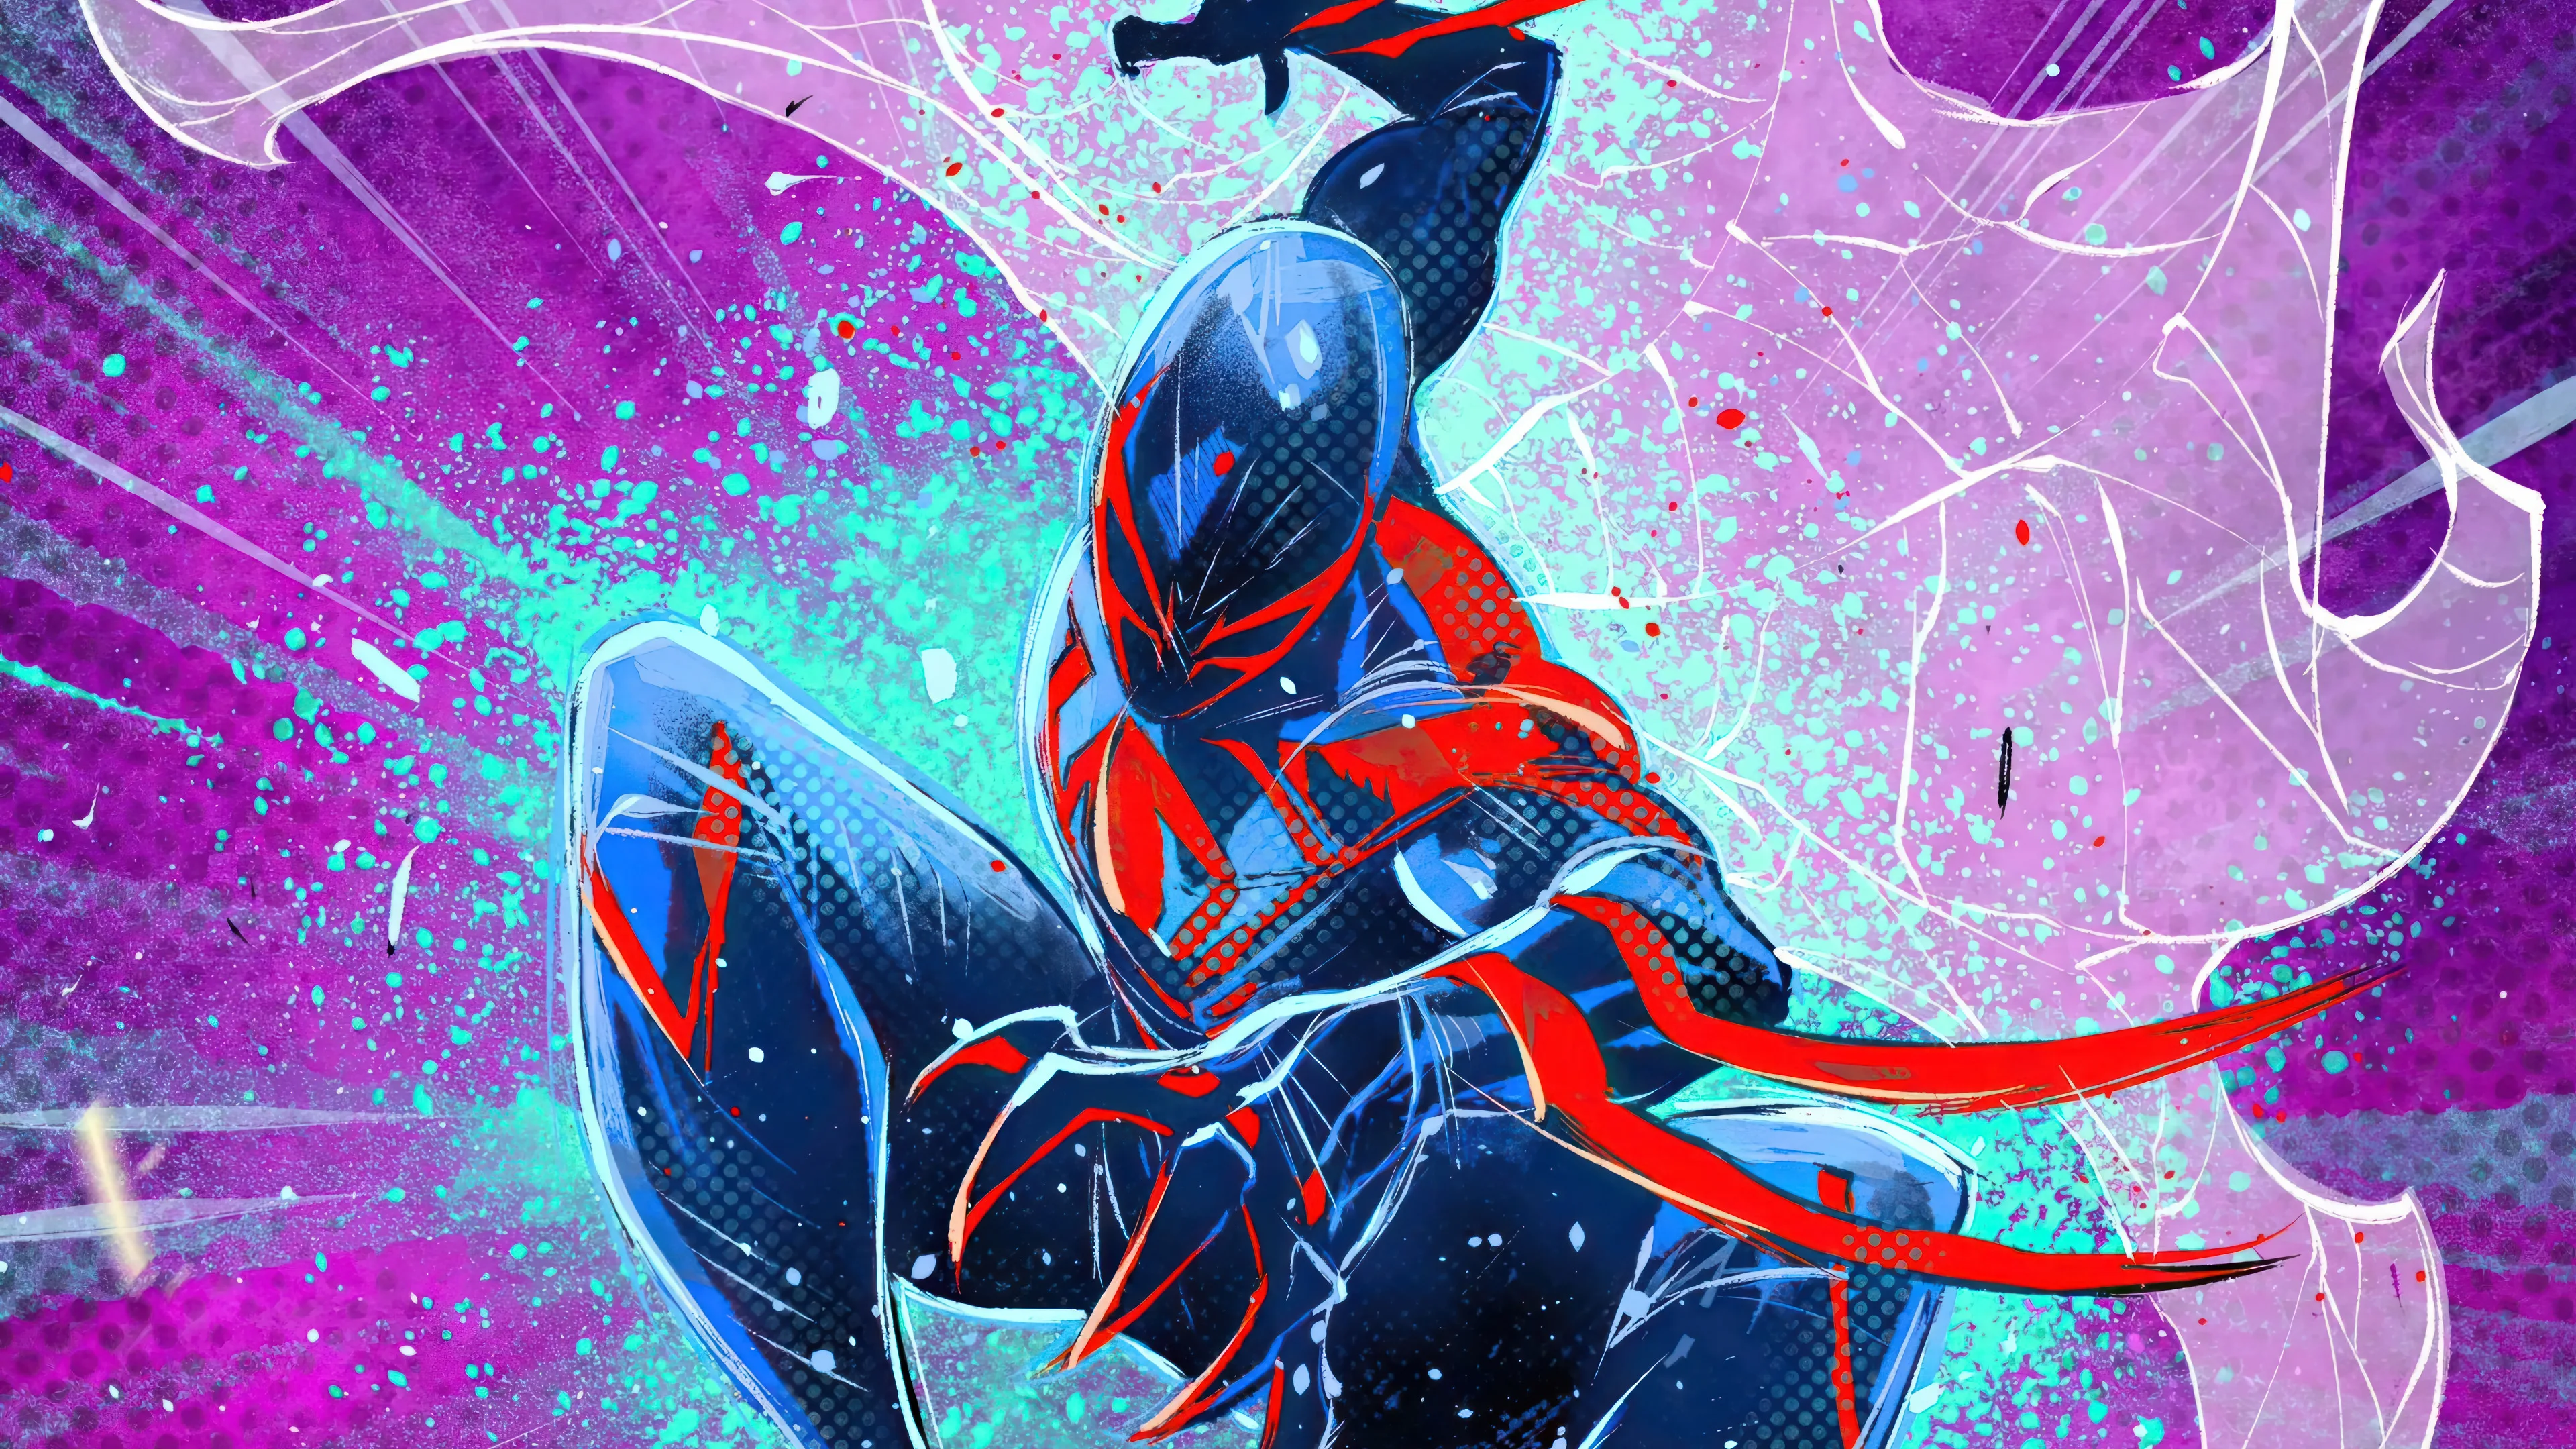 Spider-Man 2099 Spider-Man: Across the Spider-Verse 4K Wallpaper -  Pixground - Download High-Quality 4K Wallpapers For Free